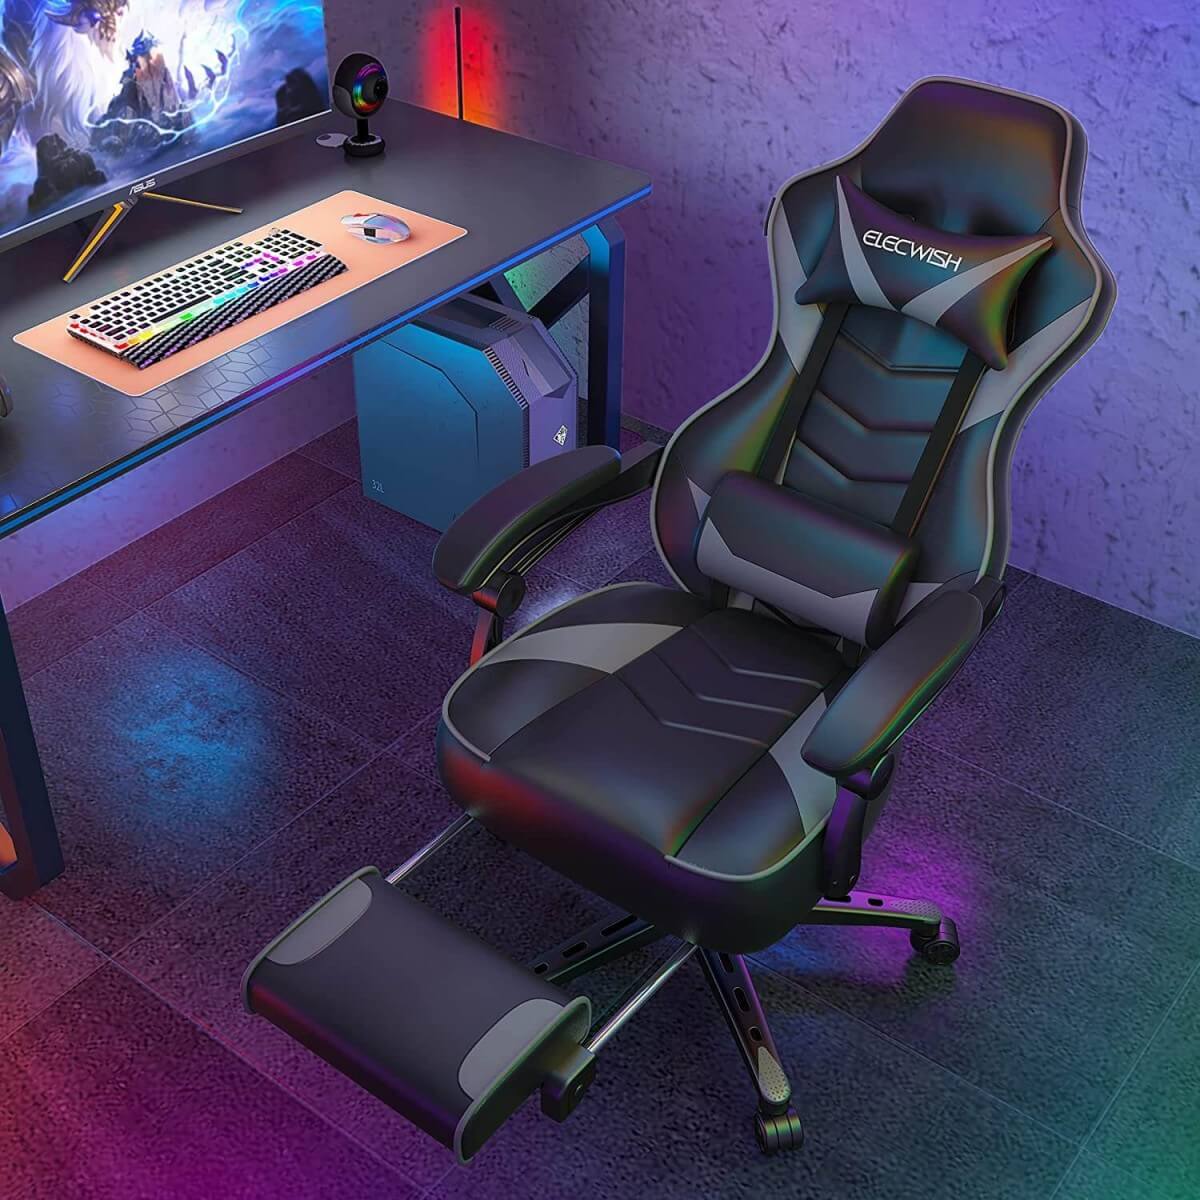 Elecwish Video Game Chairs Gray Gaming Chair With Footrest OC087